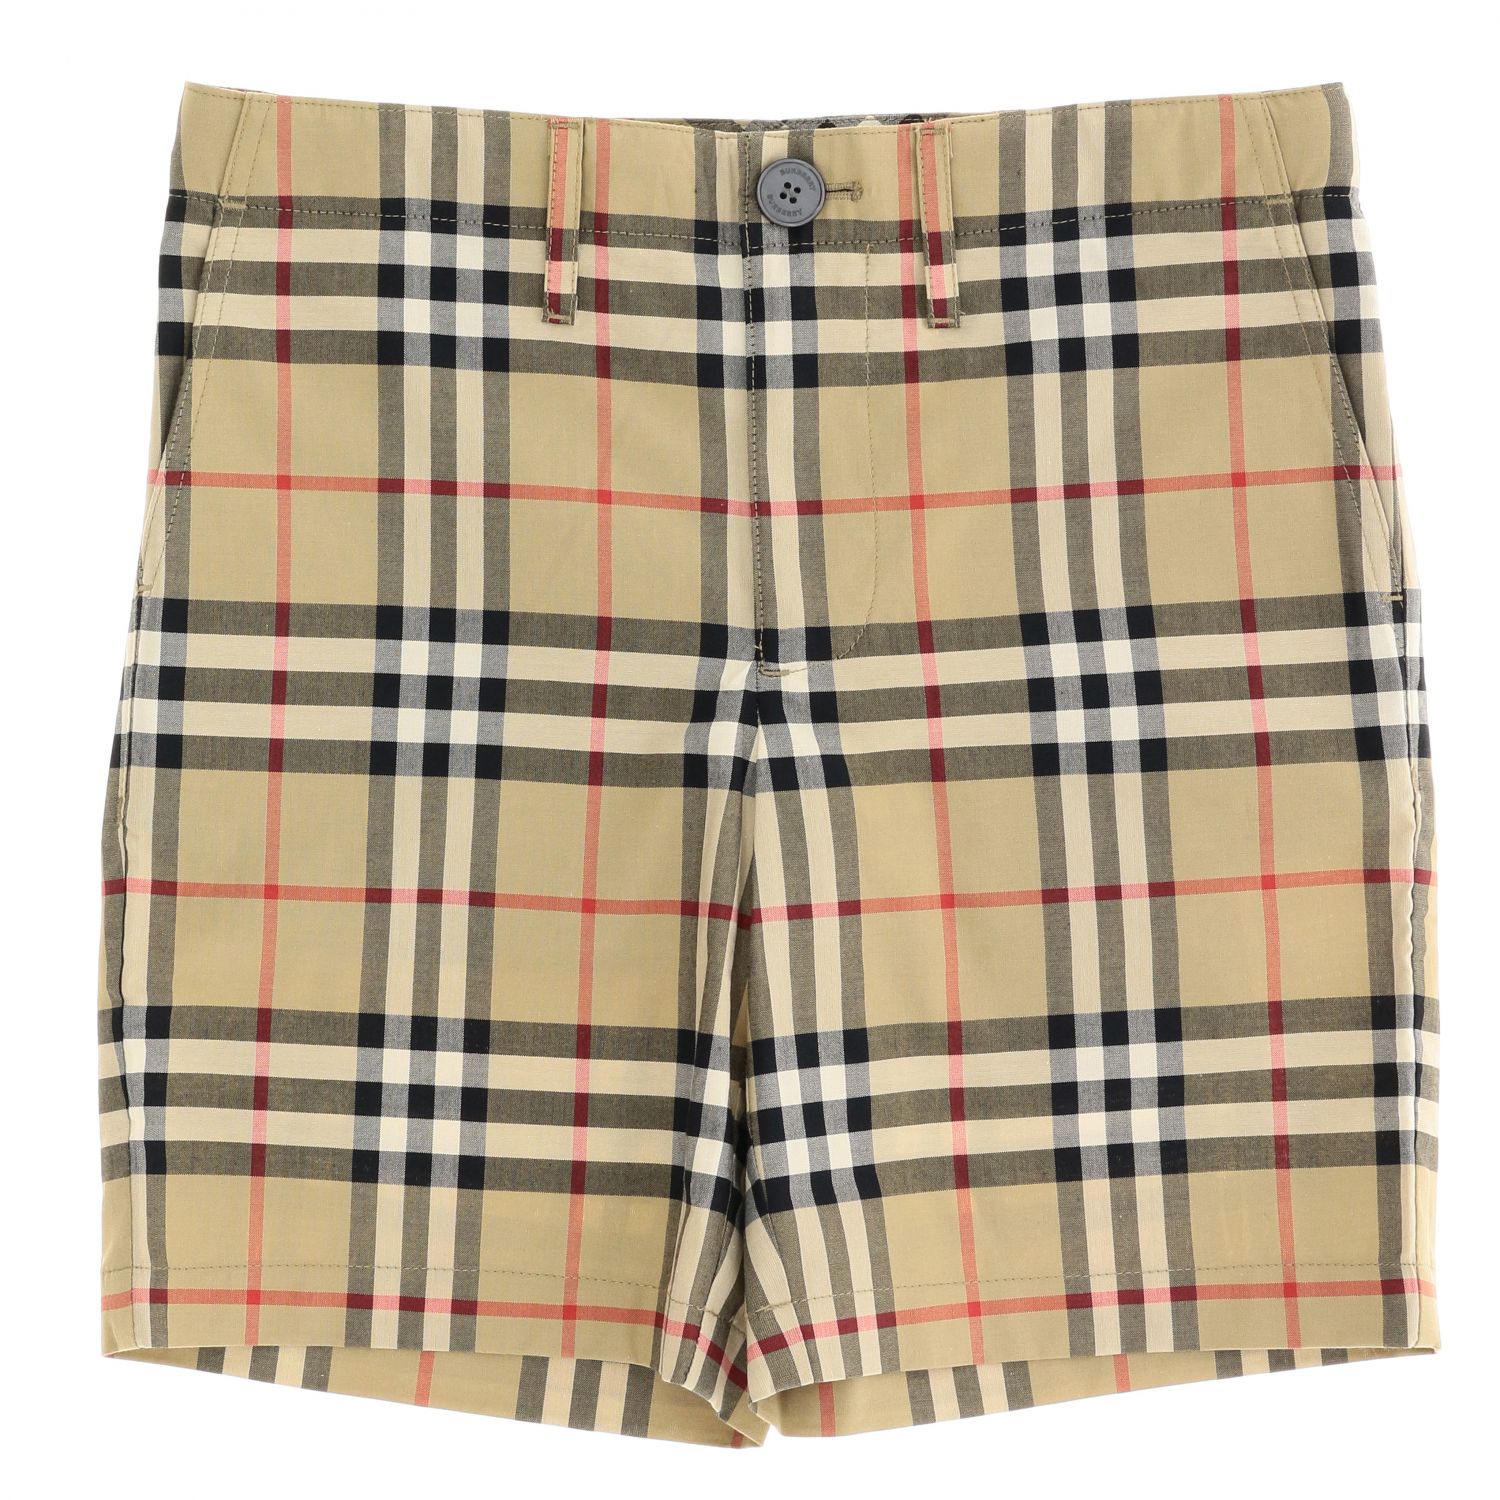 Burberry shorts in cotton with vintage 